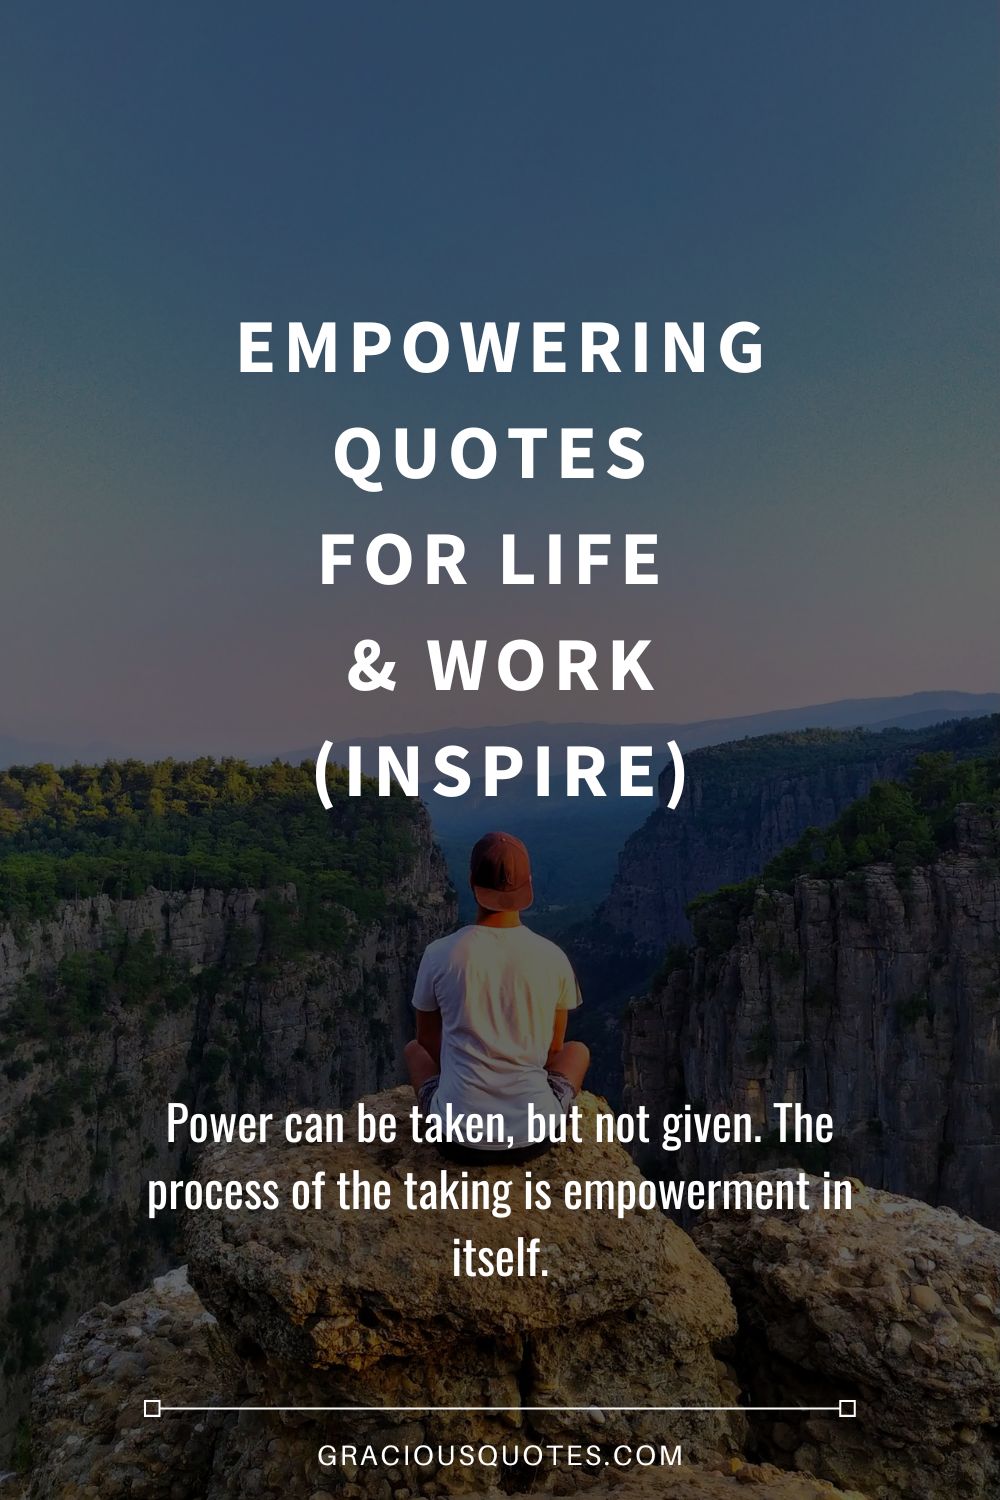 Empowering Quotes for Life & Work (INSPIRE) - Gracious Quotes